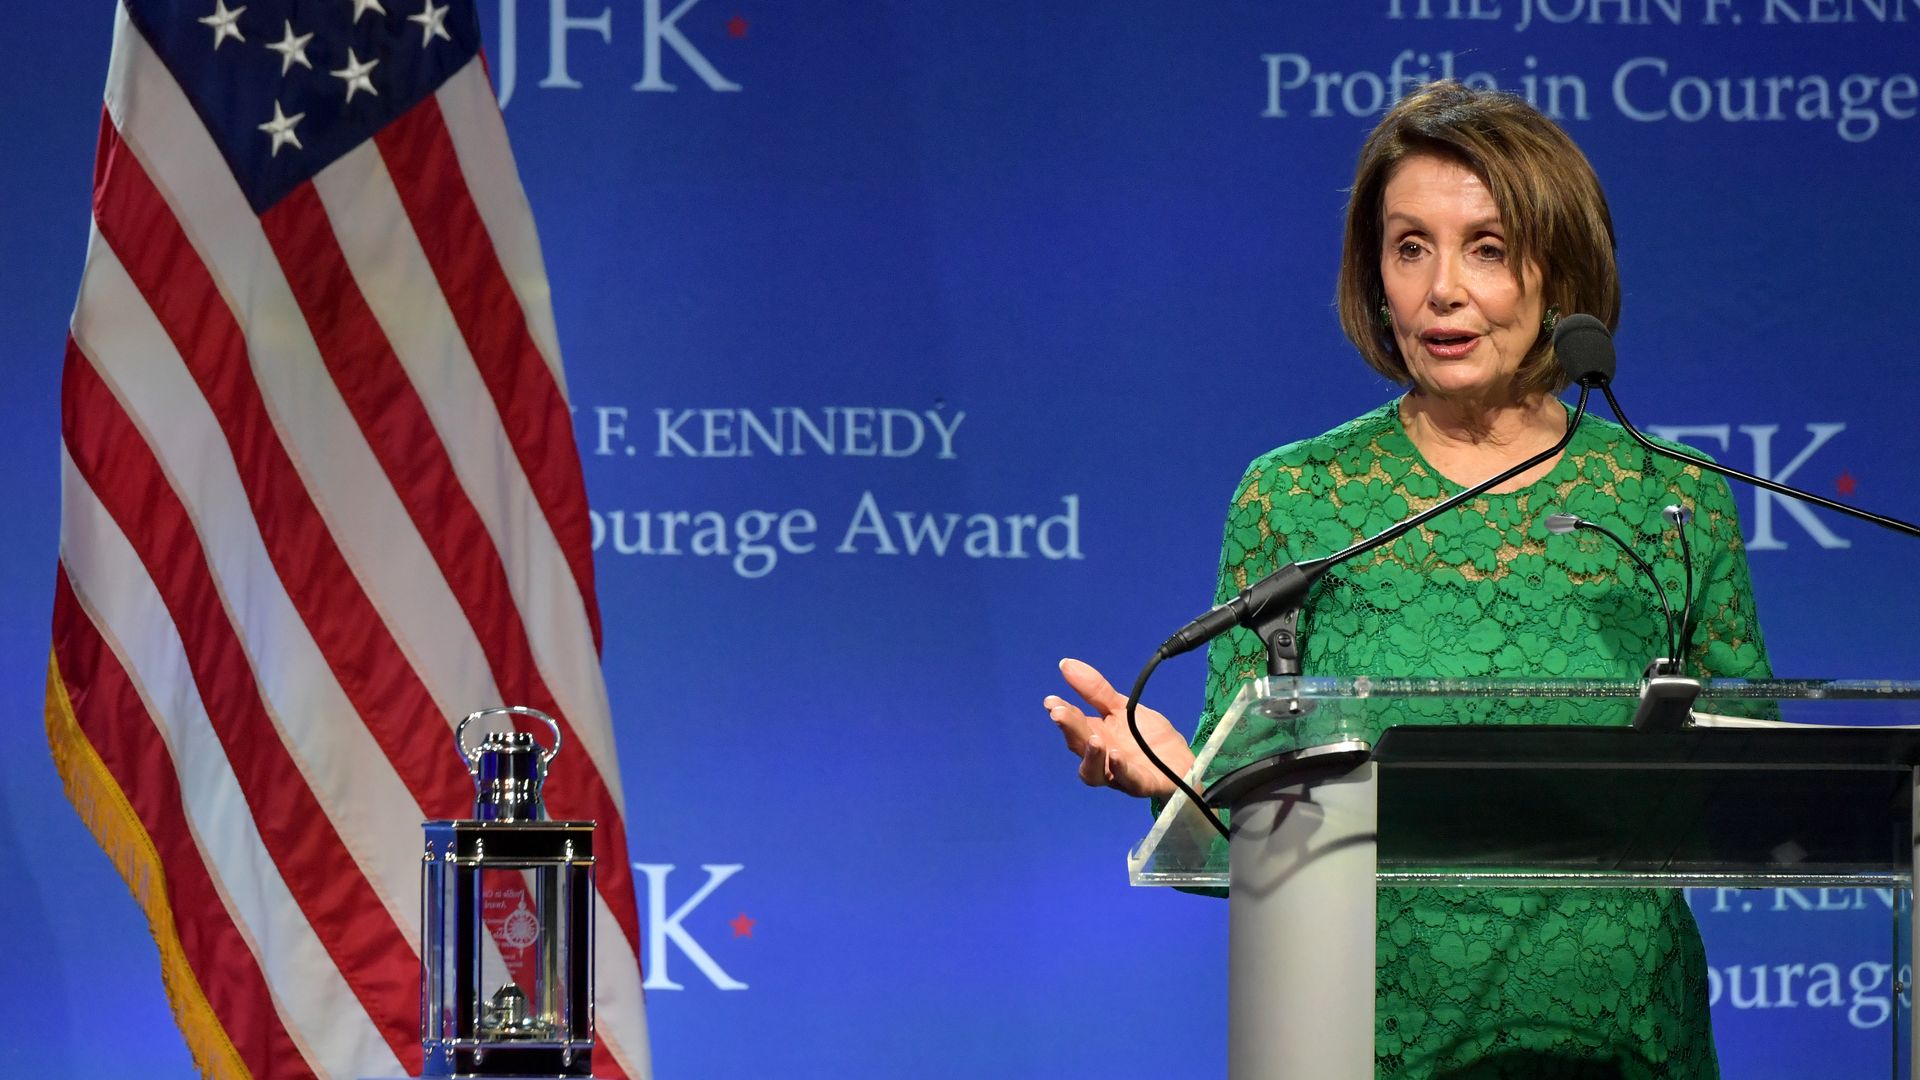  Speaker Nancy Pelosi speaks onstage after receiving the 2019 Profile in Courage Award at The John F. Kennedy Presidential Library And Museum on May 19, 2019 in Boston, Massachusetts.